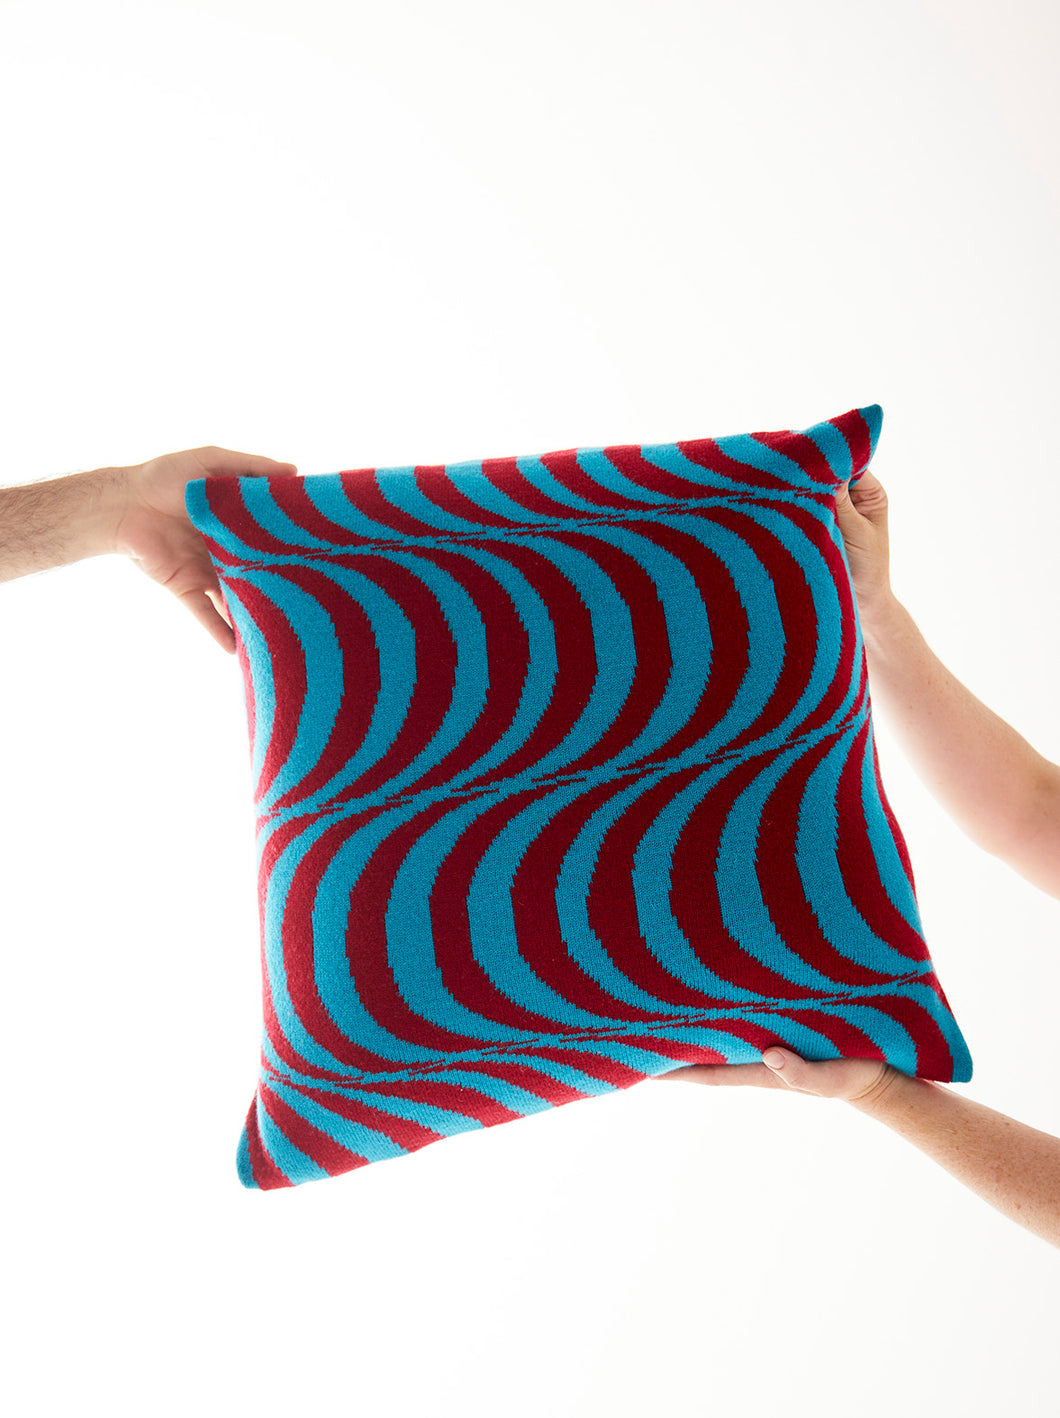 Moonage Daydream cushion cover - Maroon/Teal